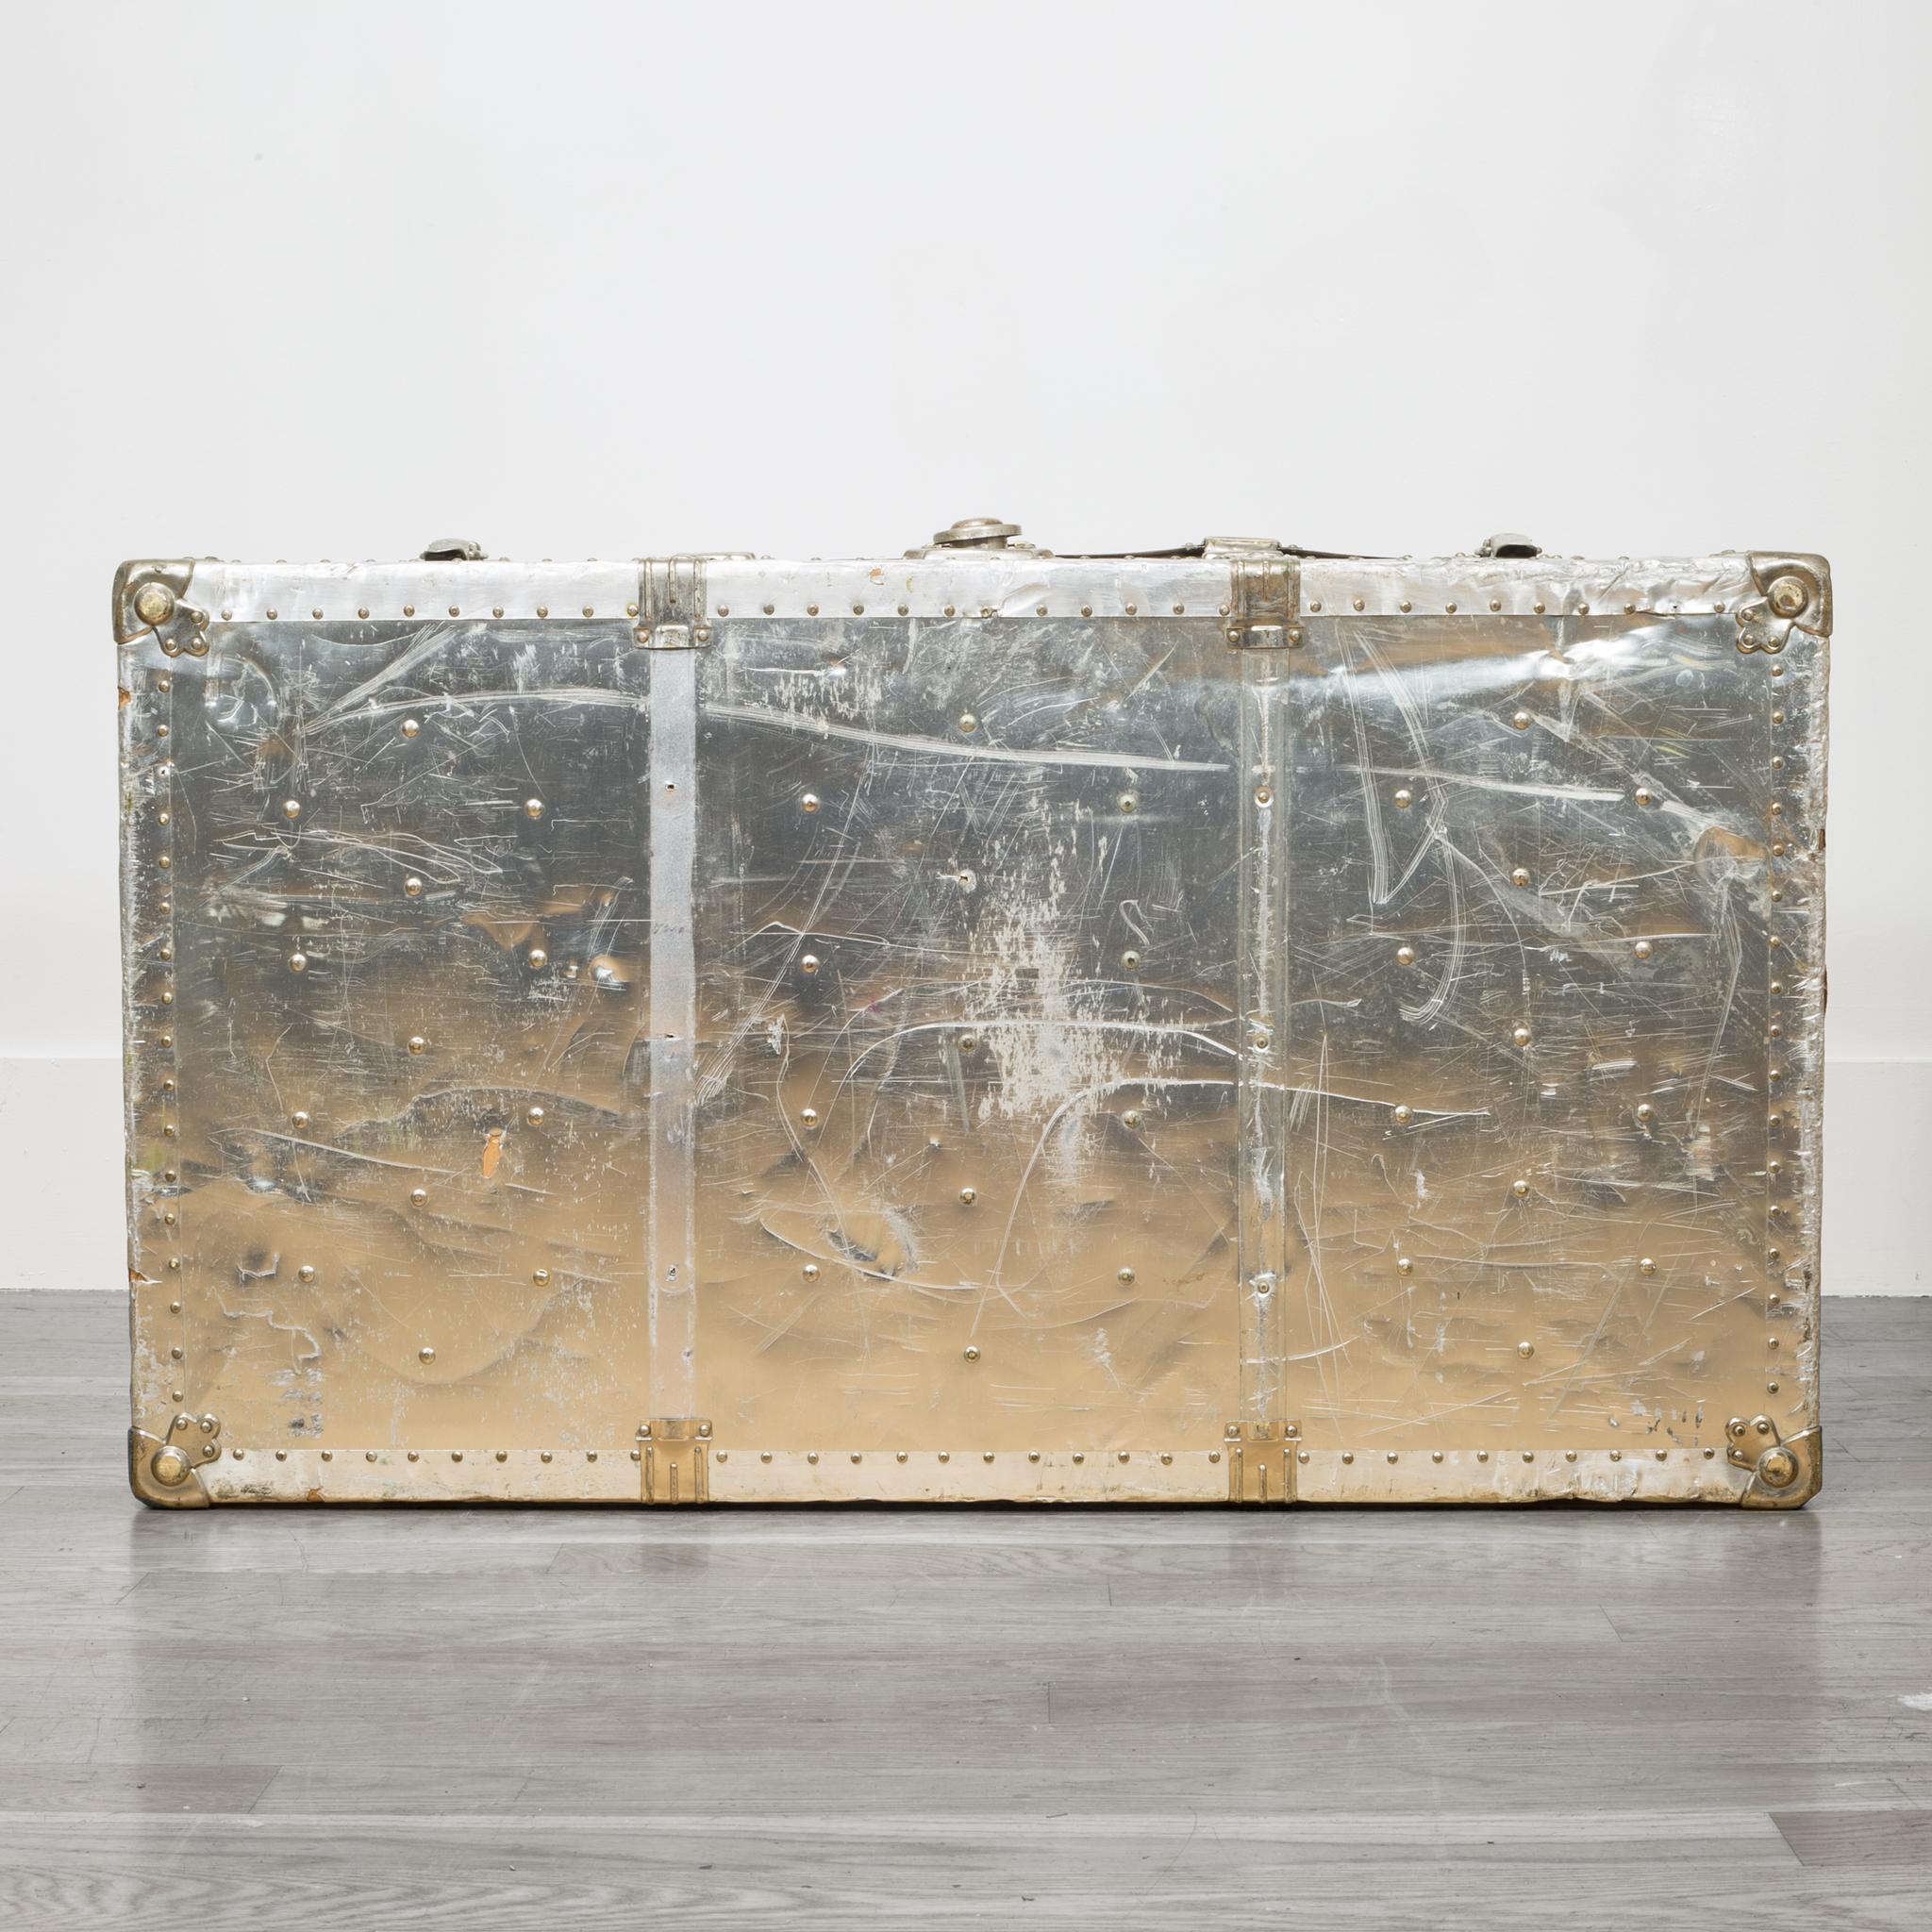 Early 20th Century Brass and Polished Aluminum Trunk with Leather Handles 2